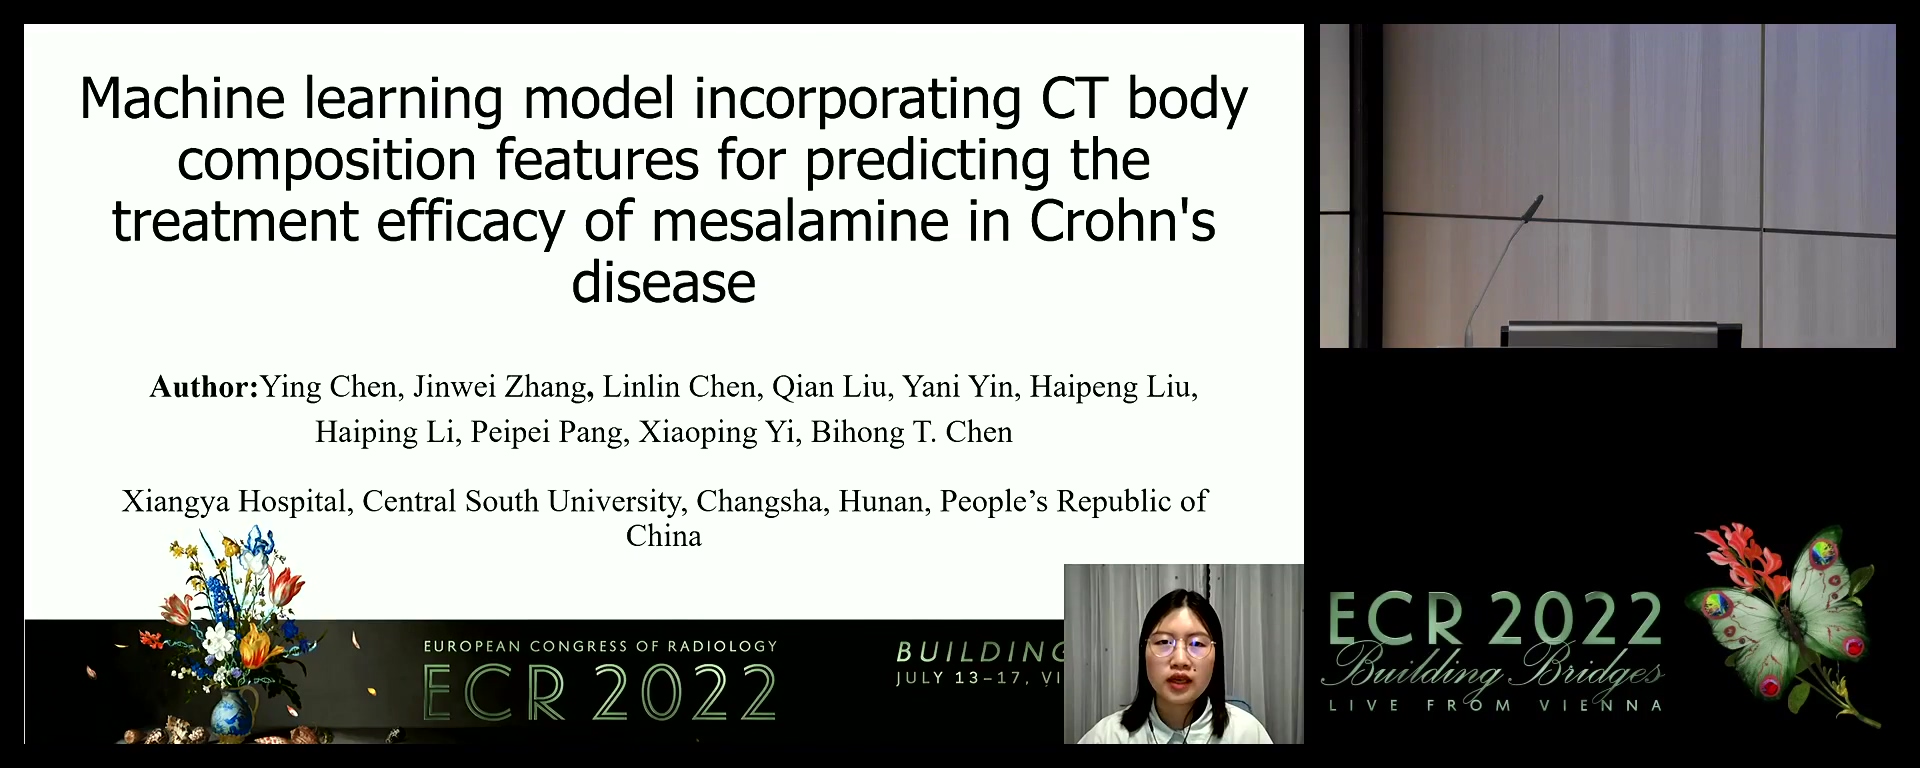 Machine learning model incorporating computed tomography body composition features for predicting the response to mesalamine treatment in Crohn's disease - Jinwei Zhang, Changsha / CN